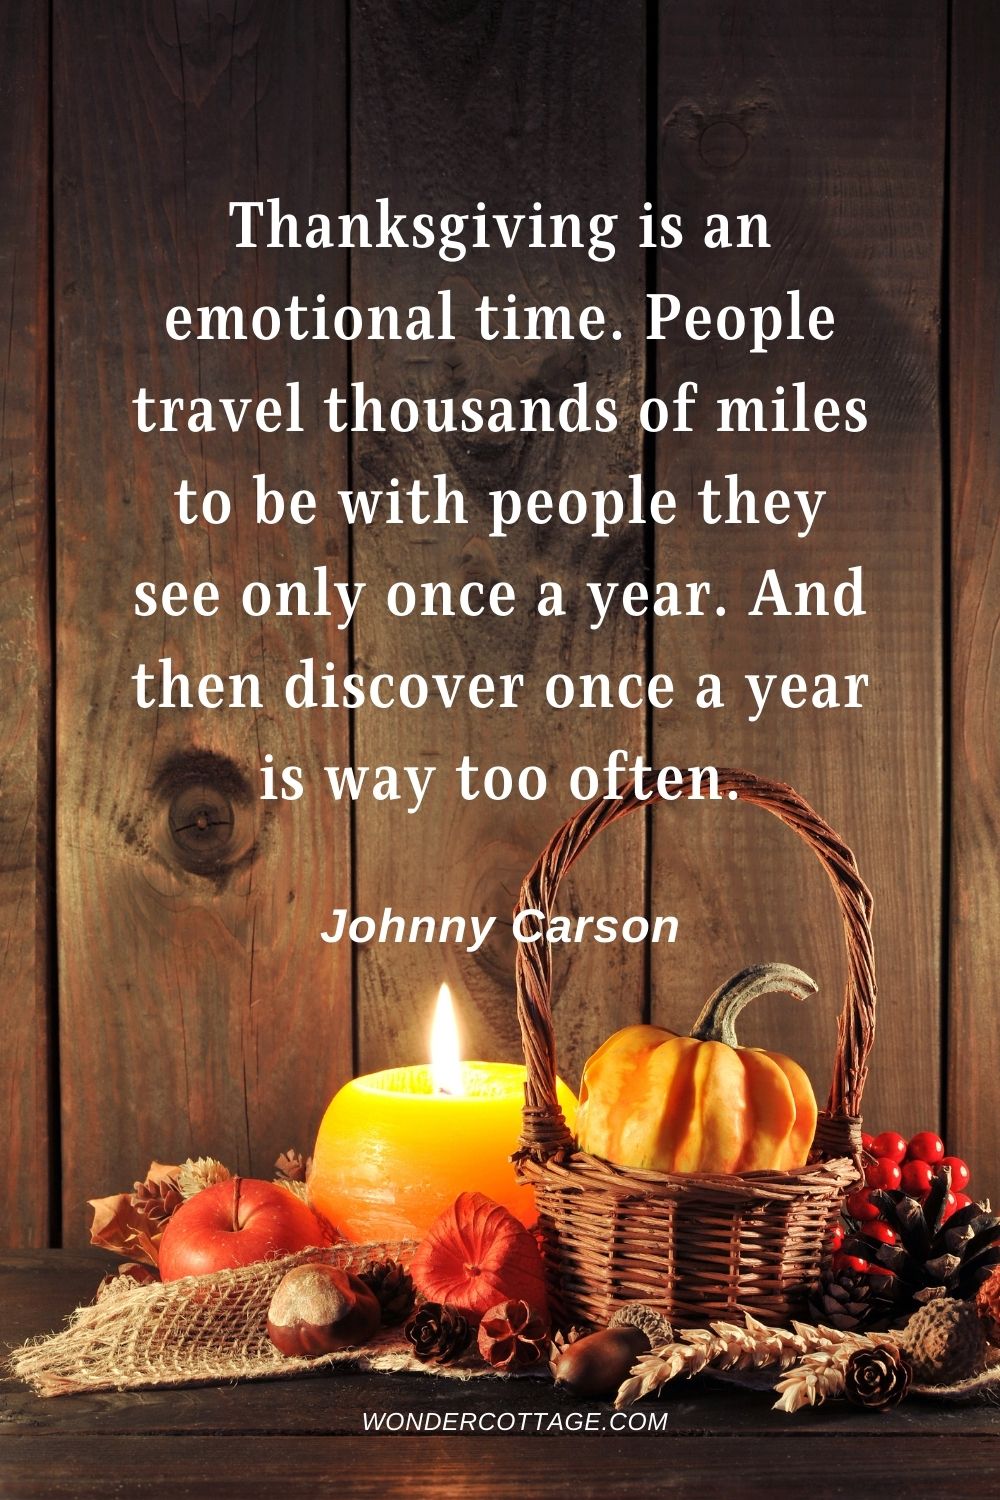 Thanksgiving is an emotional time. People travel thousands of miles to be with people they see only once a year. And then discover once a year is way too often. Johnny Carson